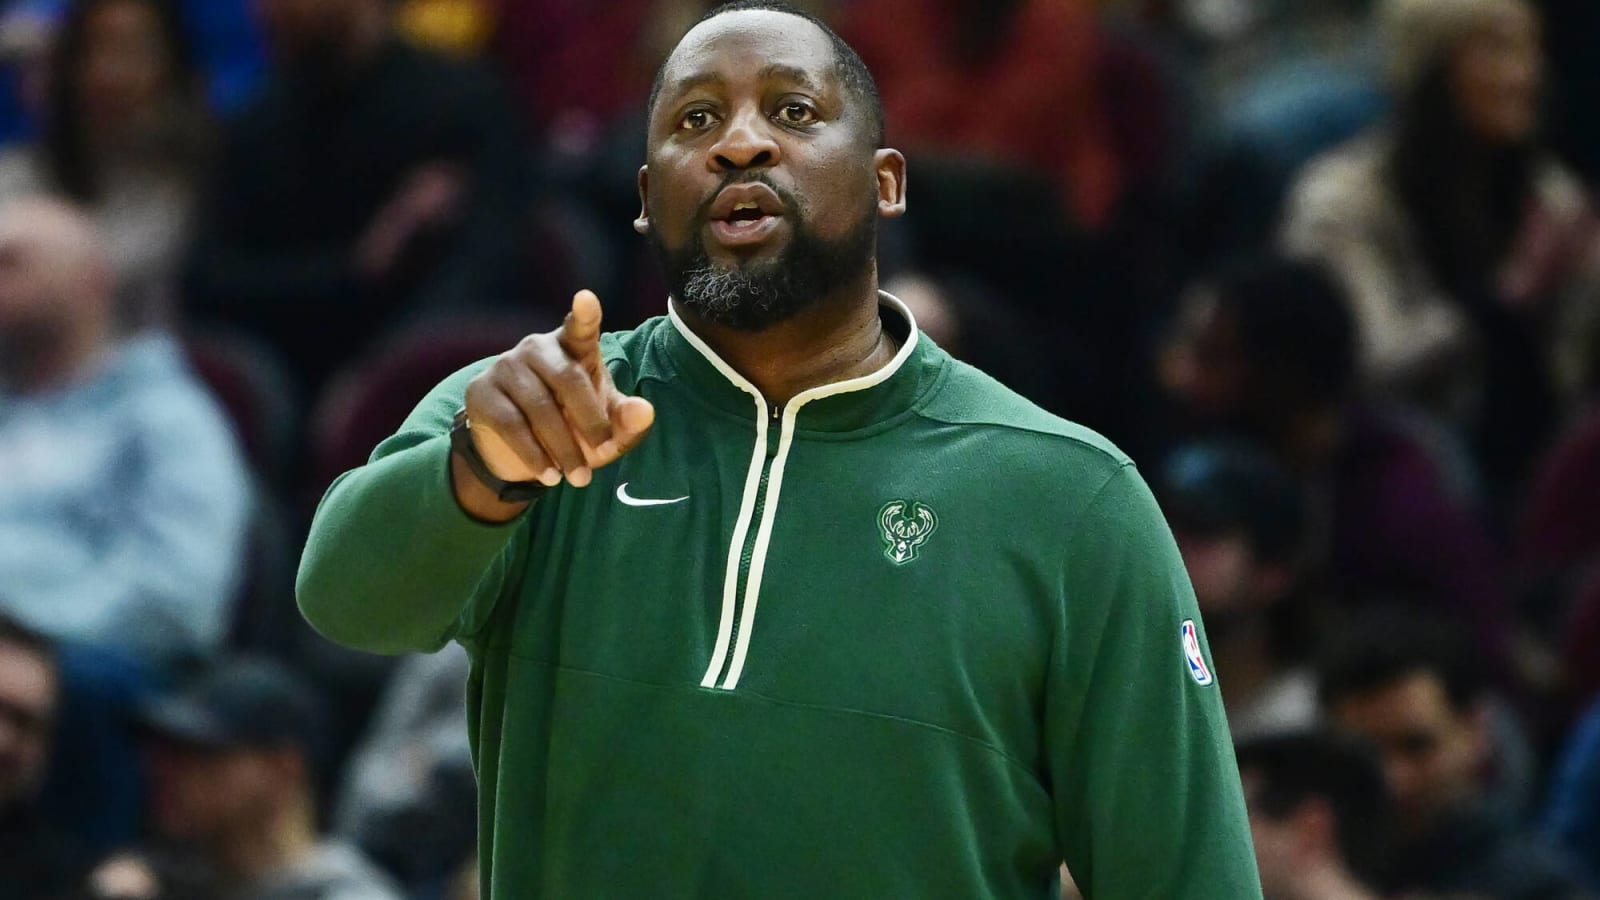 Ex-Bucks coach Adrian Griffin: ‘I feel good about the job we did’